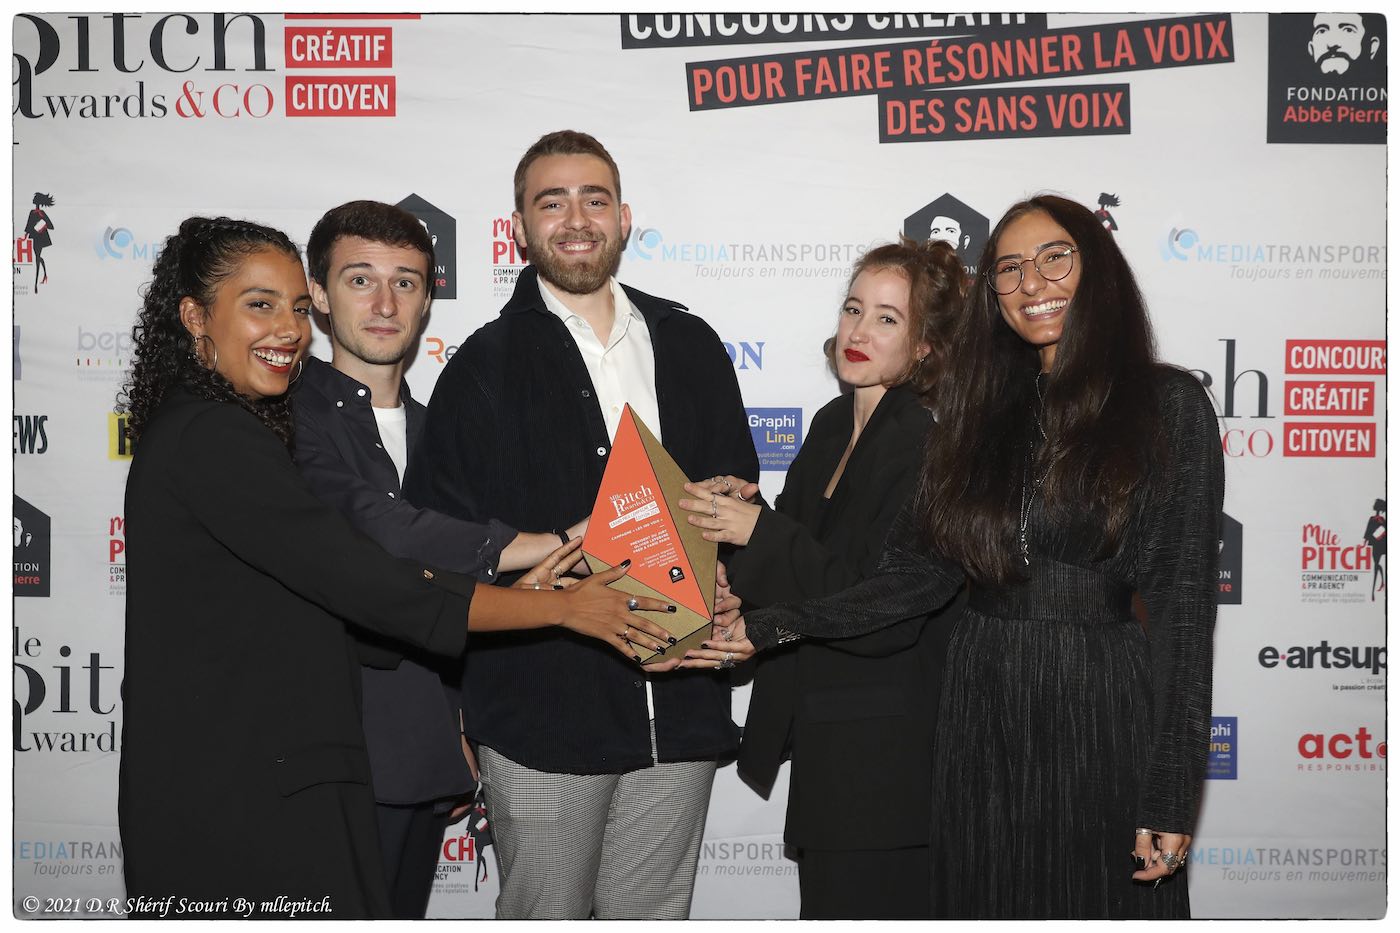 Prise de vues Photocall Mle Pitch Awards & Co